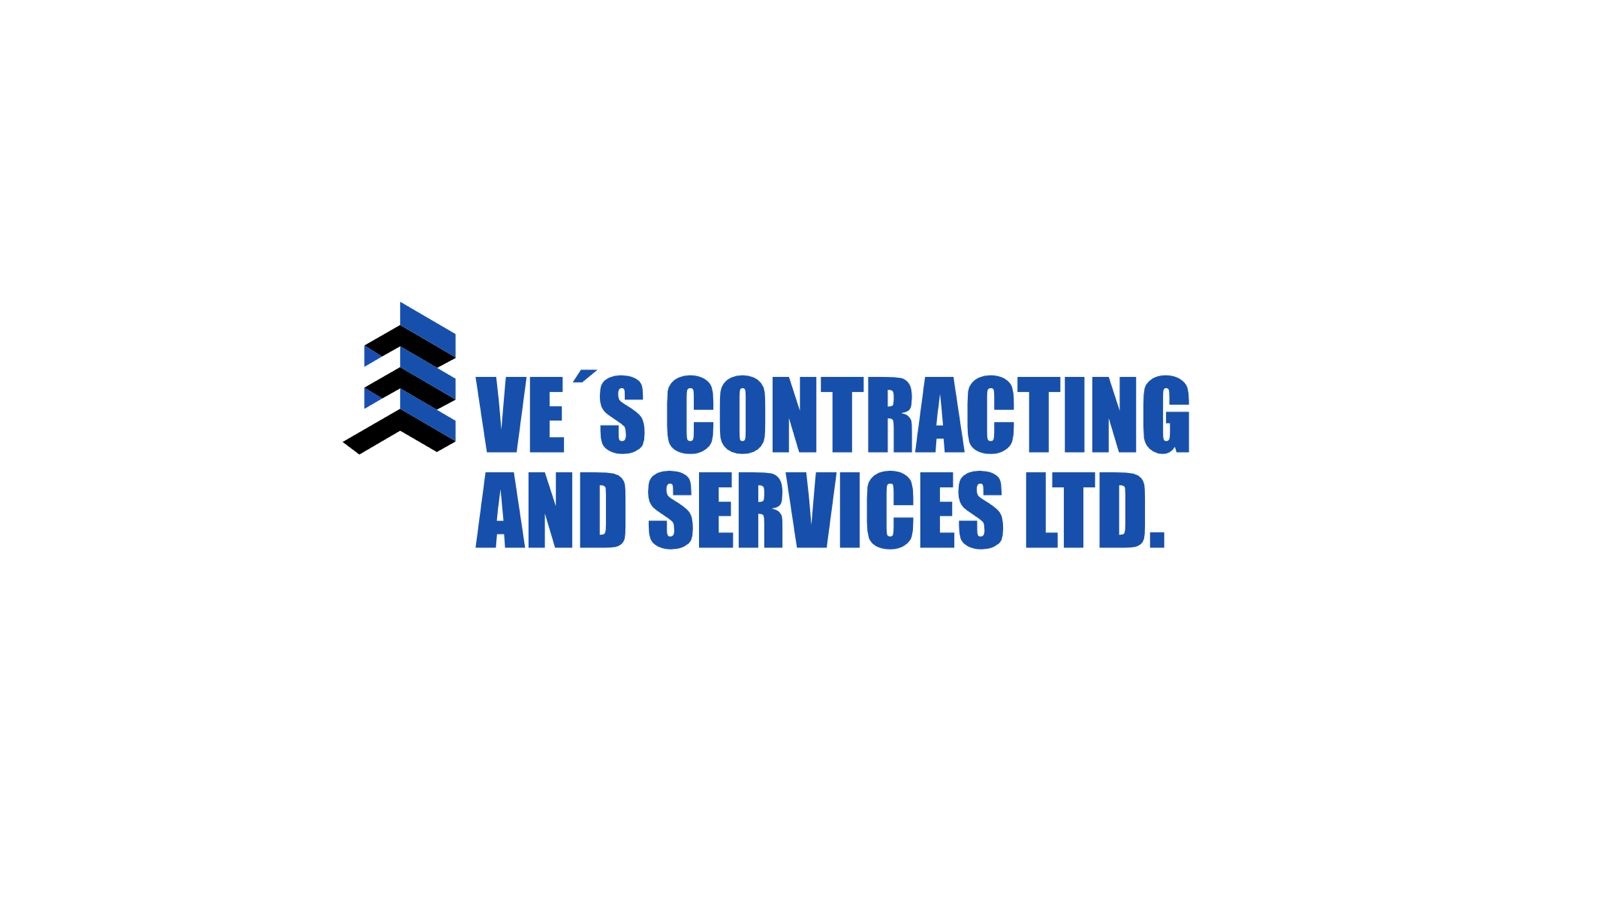 Eve’s Contracting and Services LTD's logo